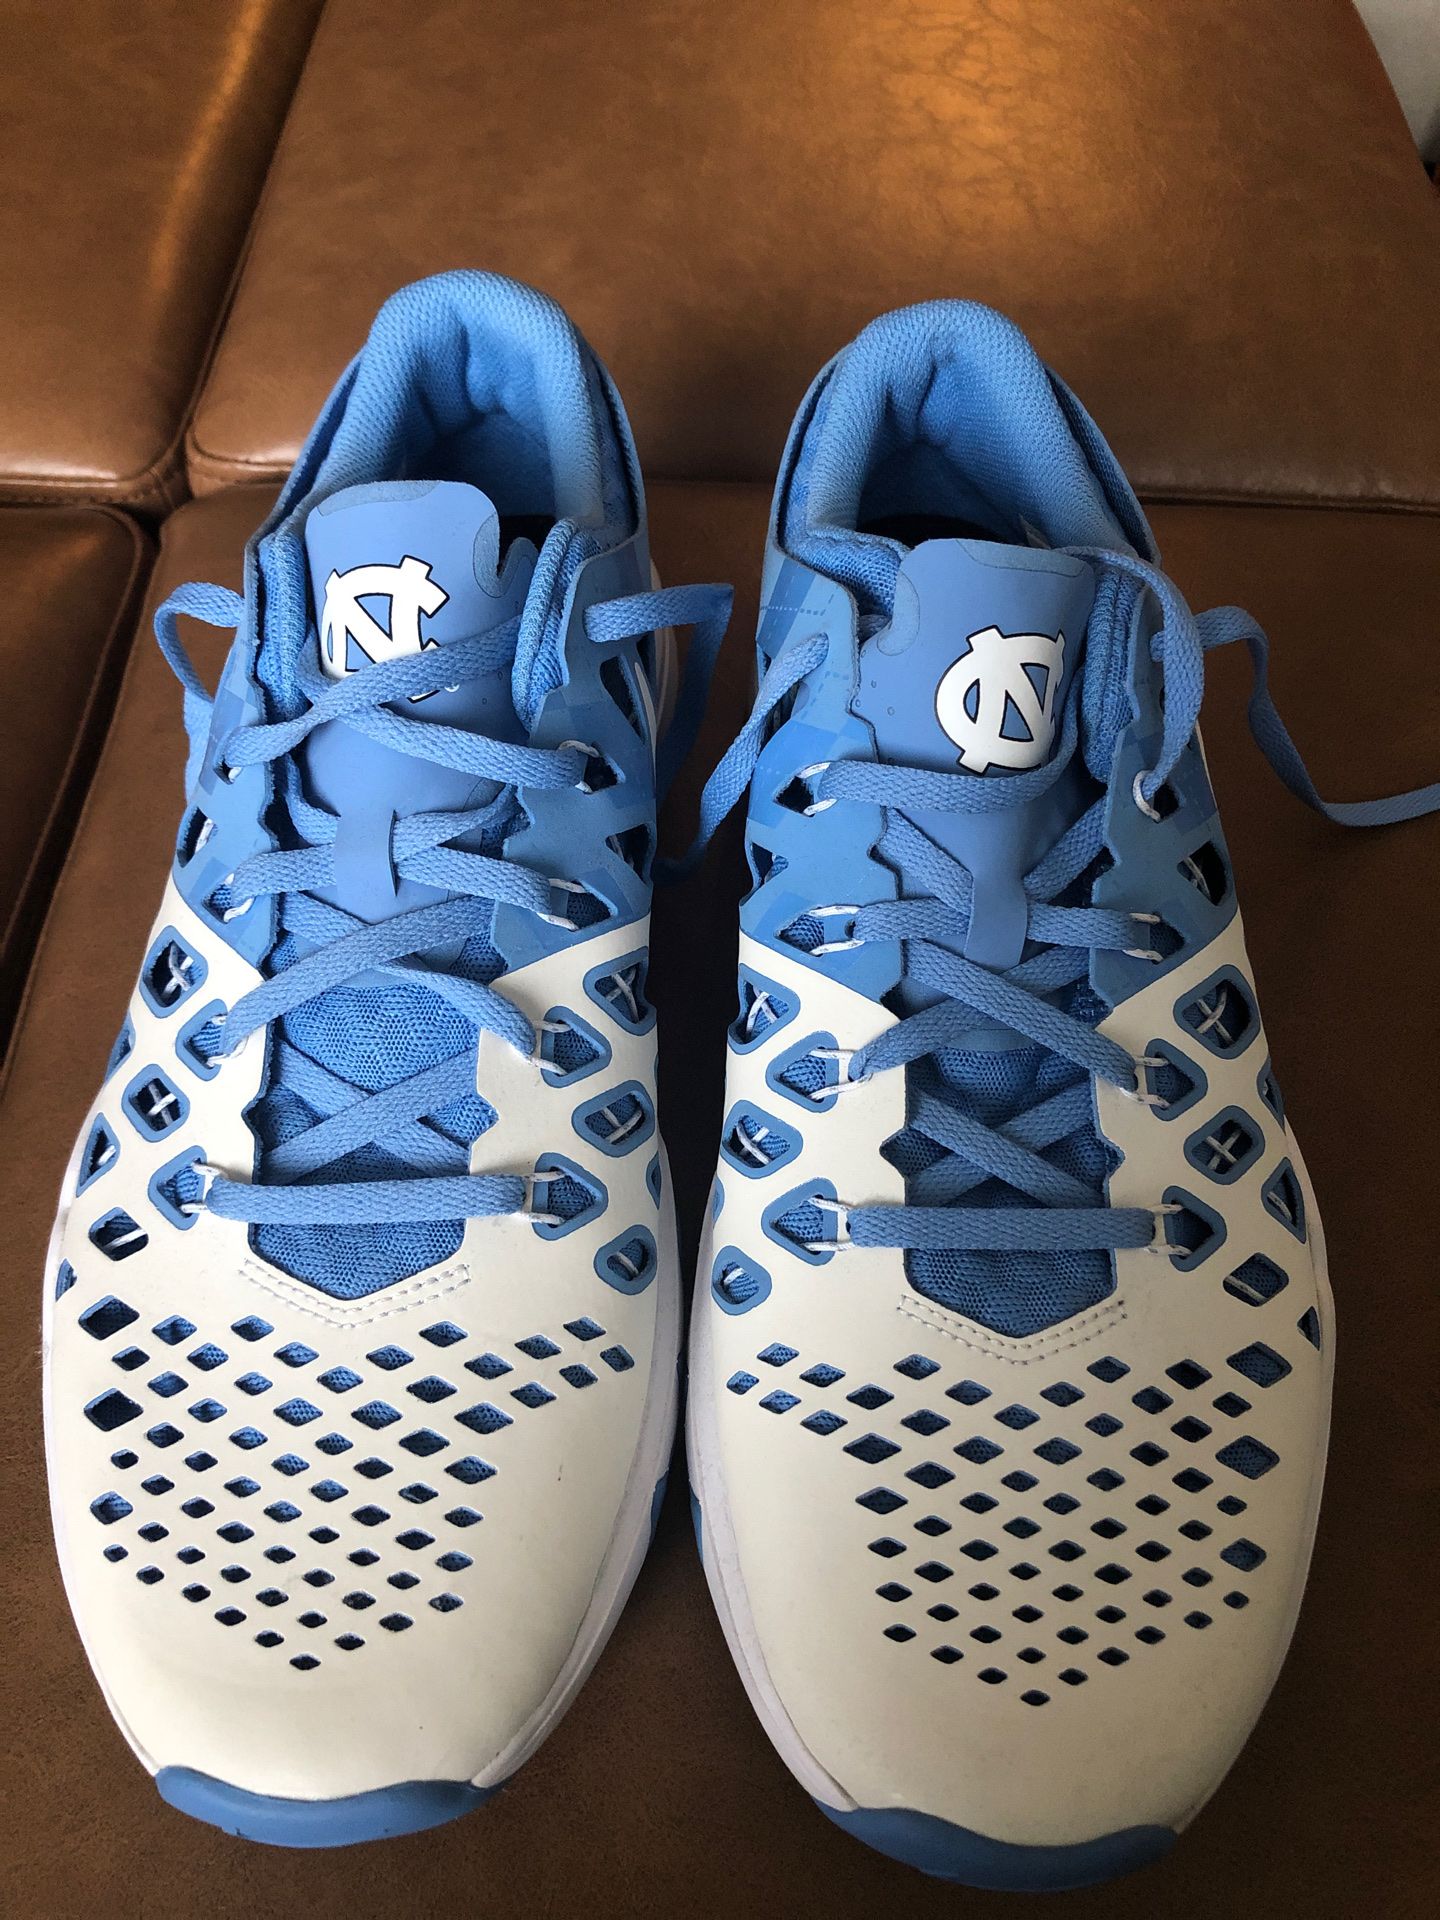 UNC Nike Running Shoes